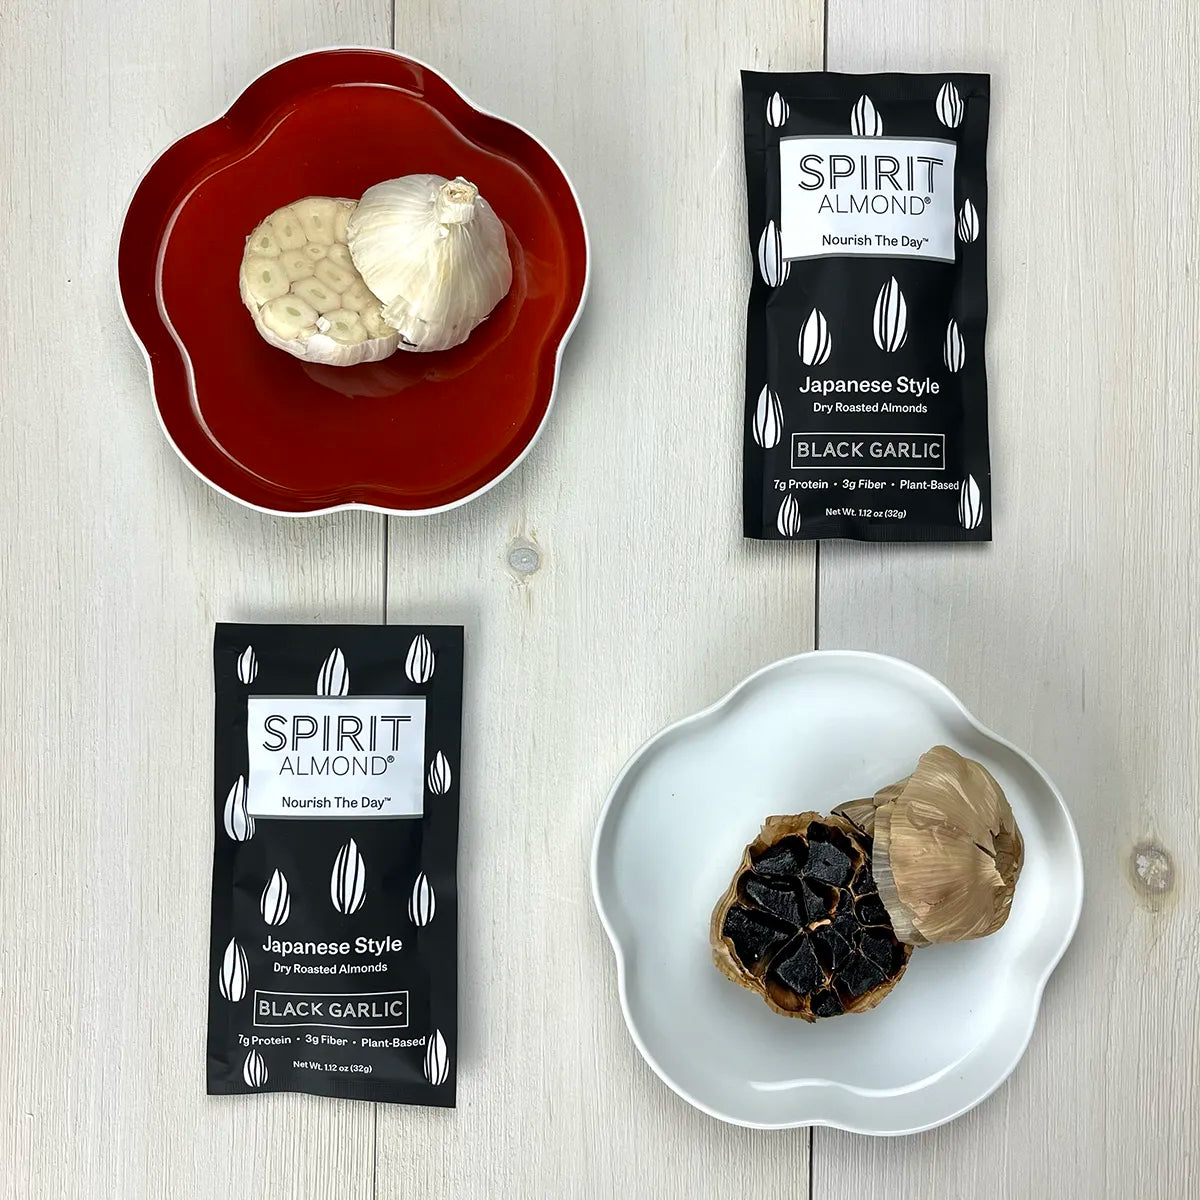 Cross section of white garlic and black garlic with two packages of SPIRIT Almond Black Garlic Almonds